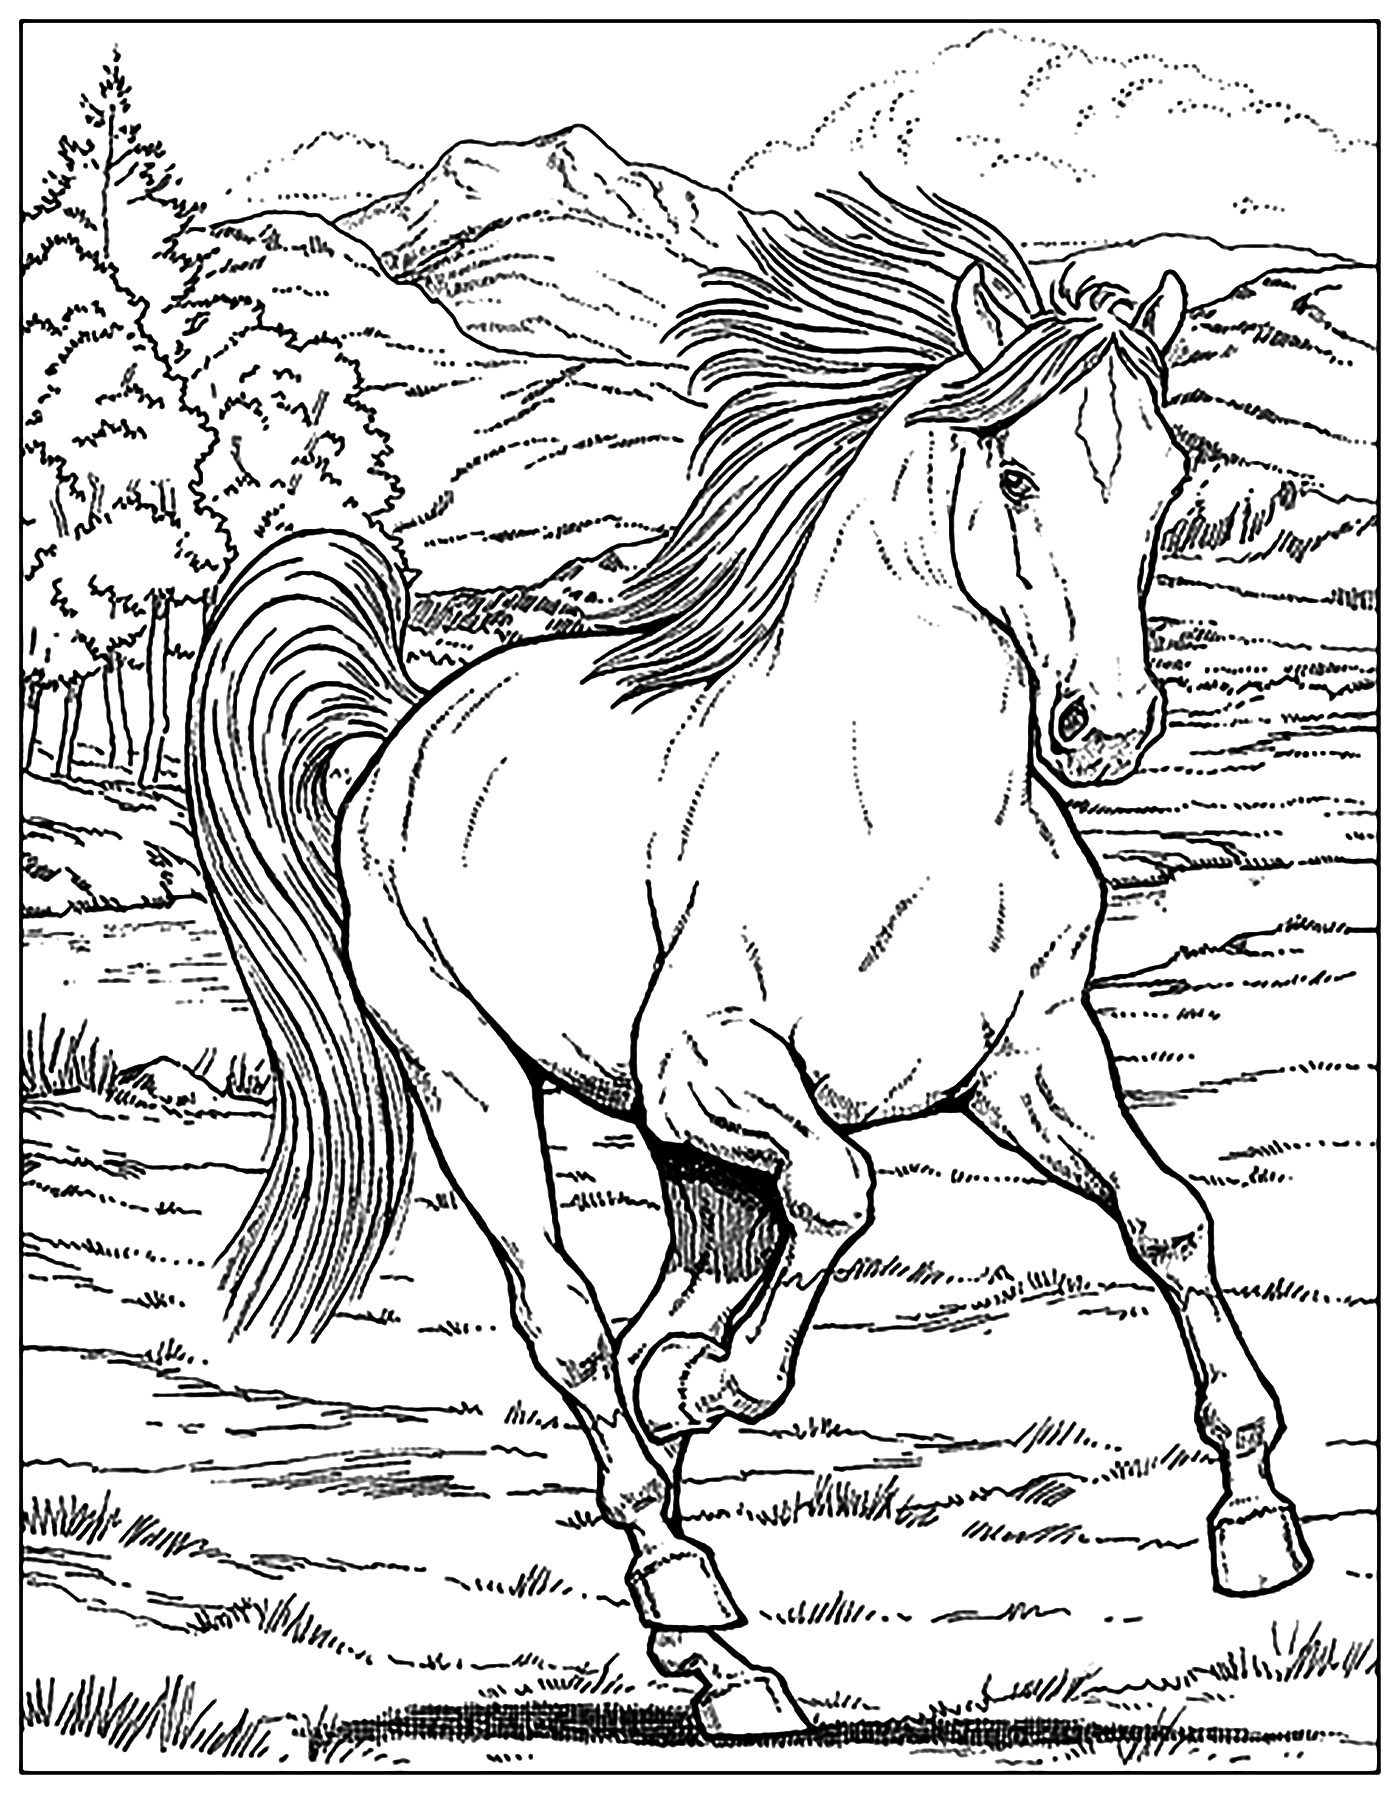 A galloping horse